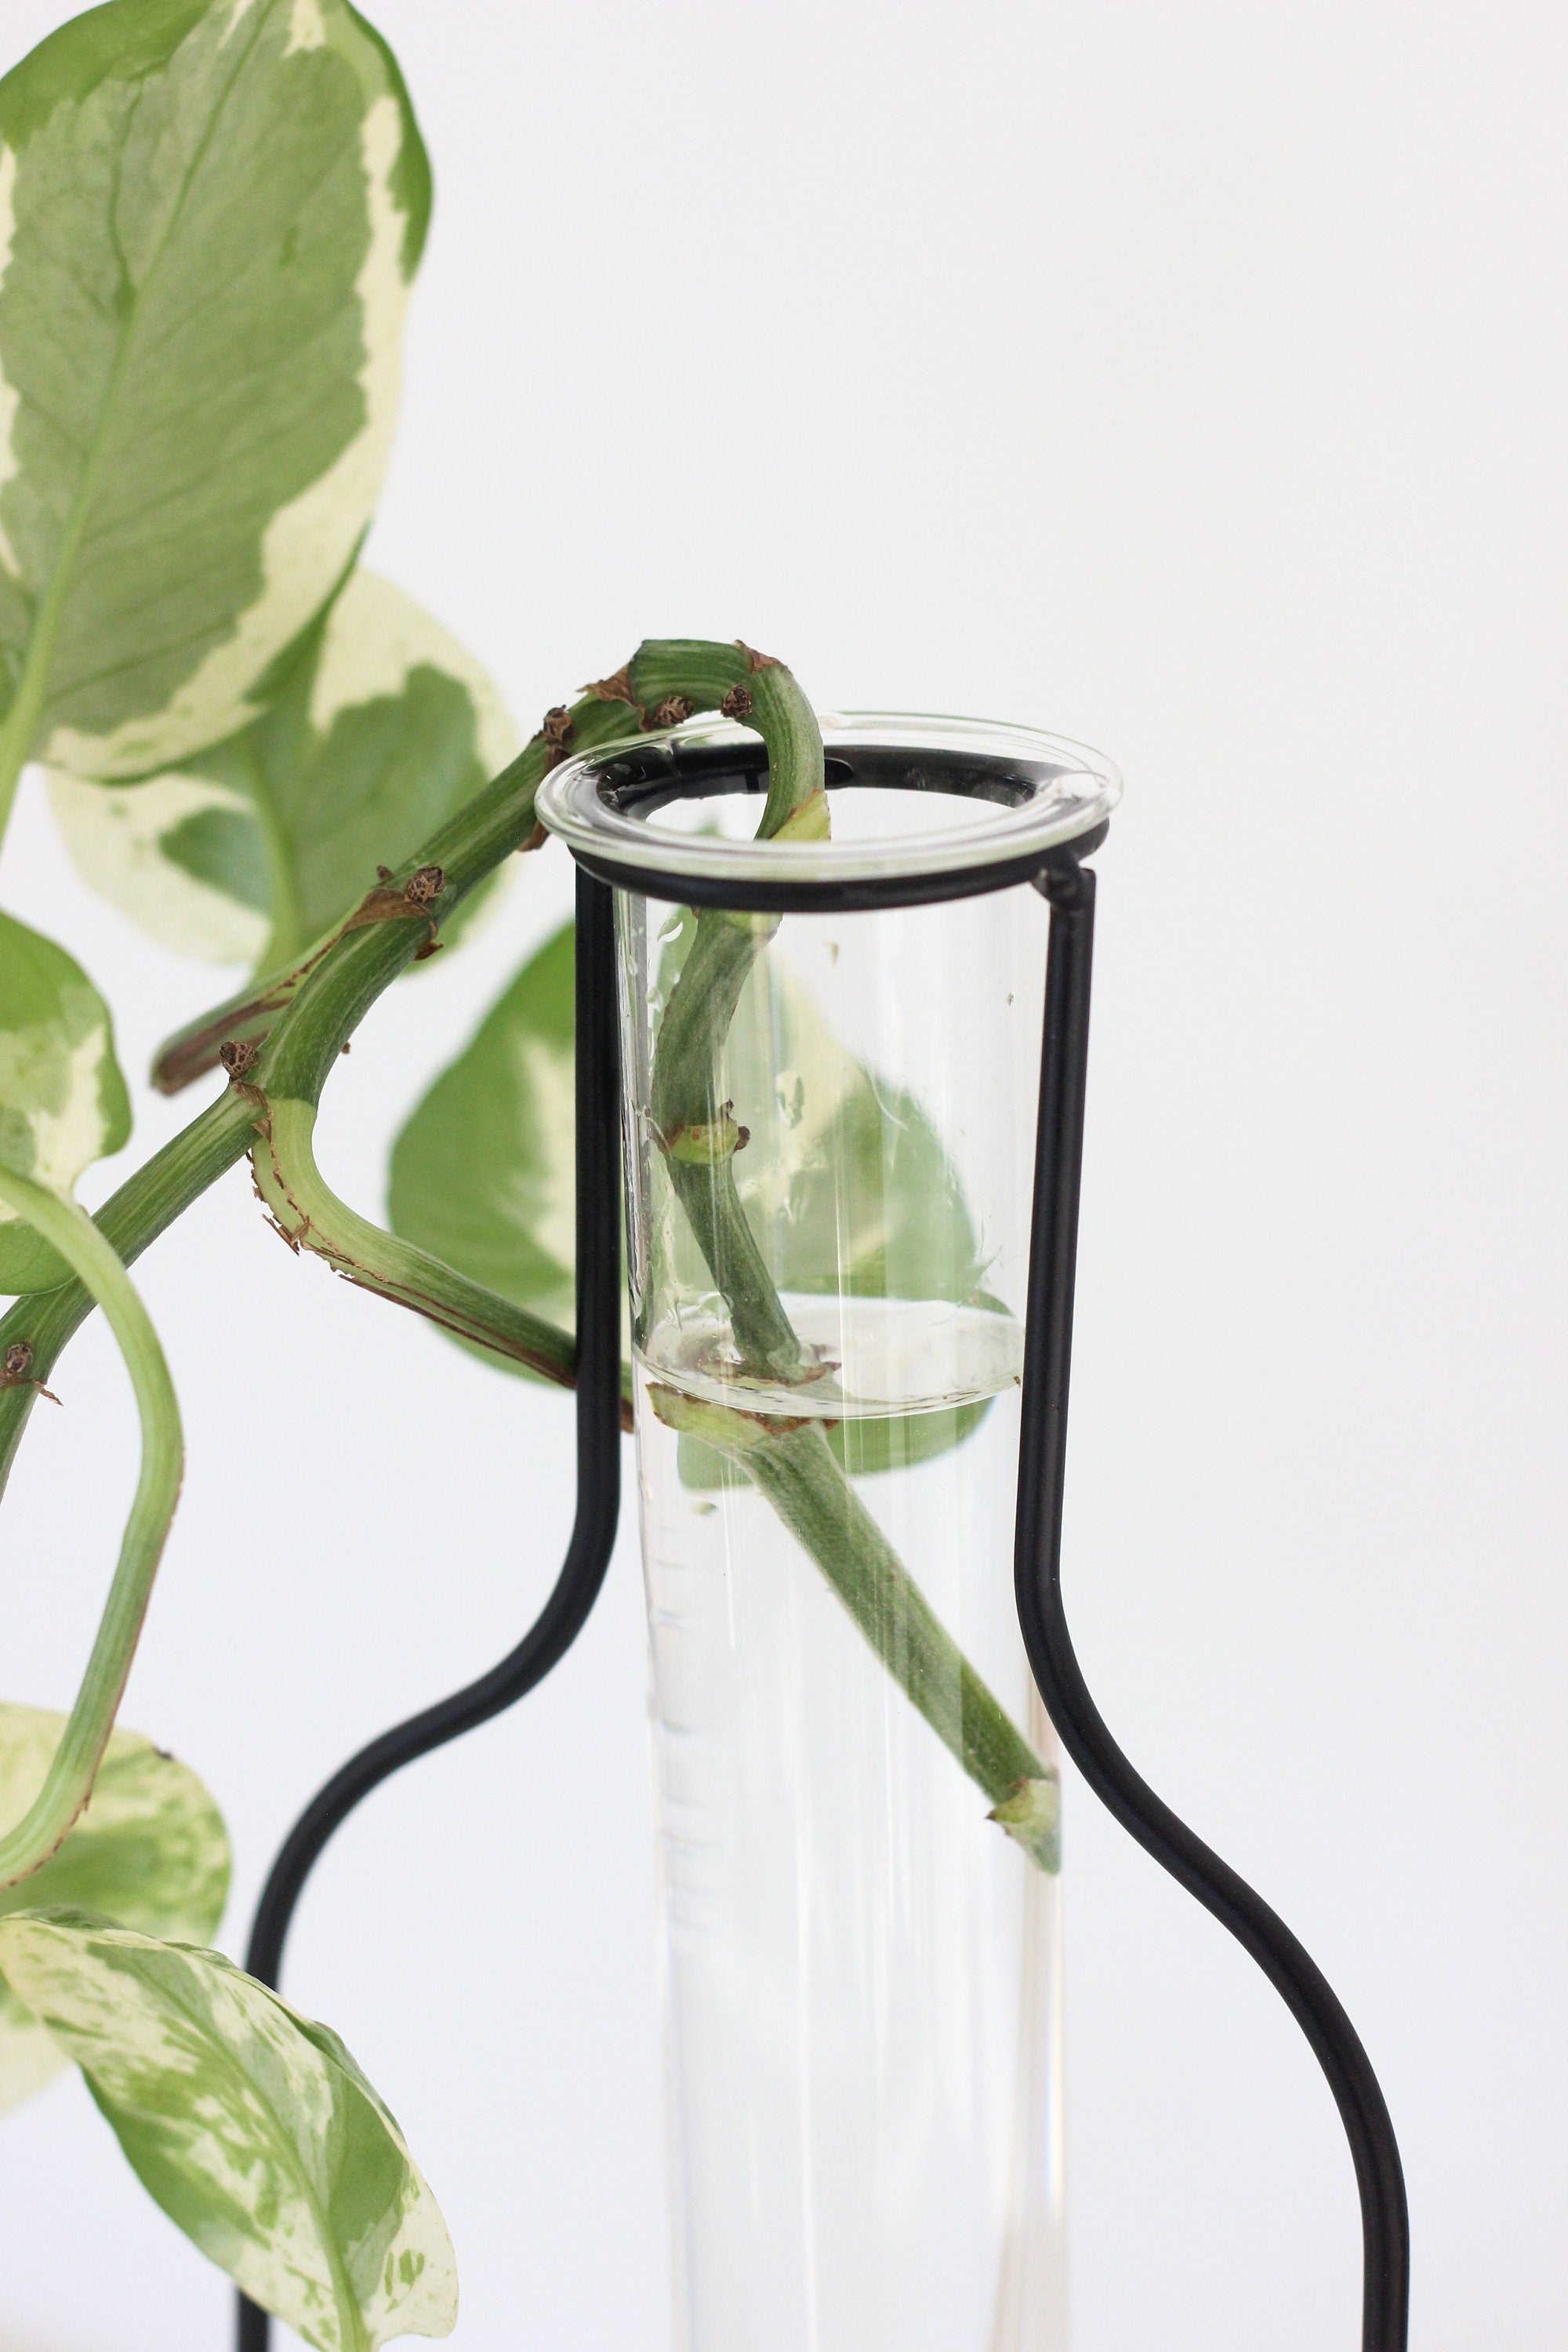 Propagation Station Tube Vase with Black Silhouette Frame